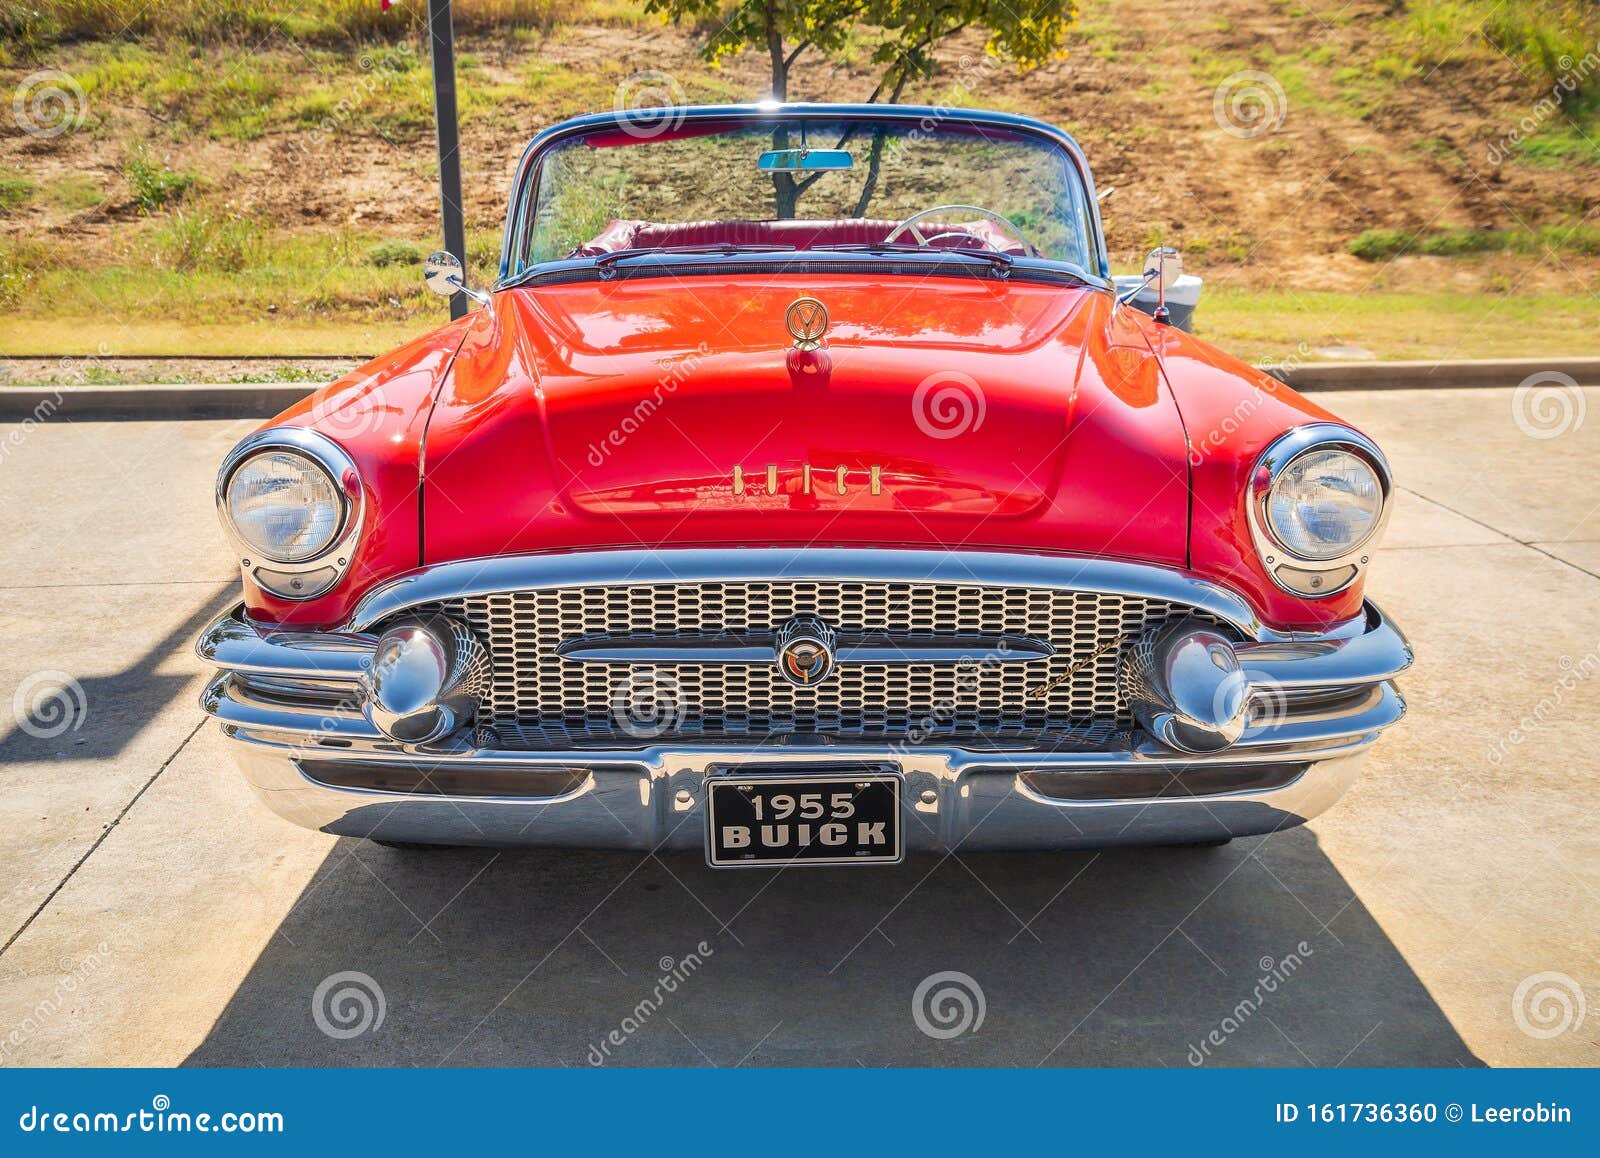 Red Vintage 1955 Buick Convertible Classic Editorial Image - Image shiny, chrome: 161736360